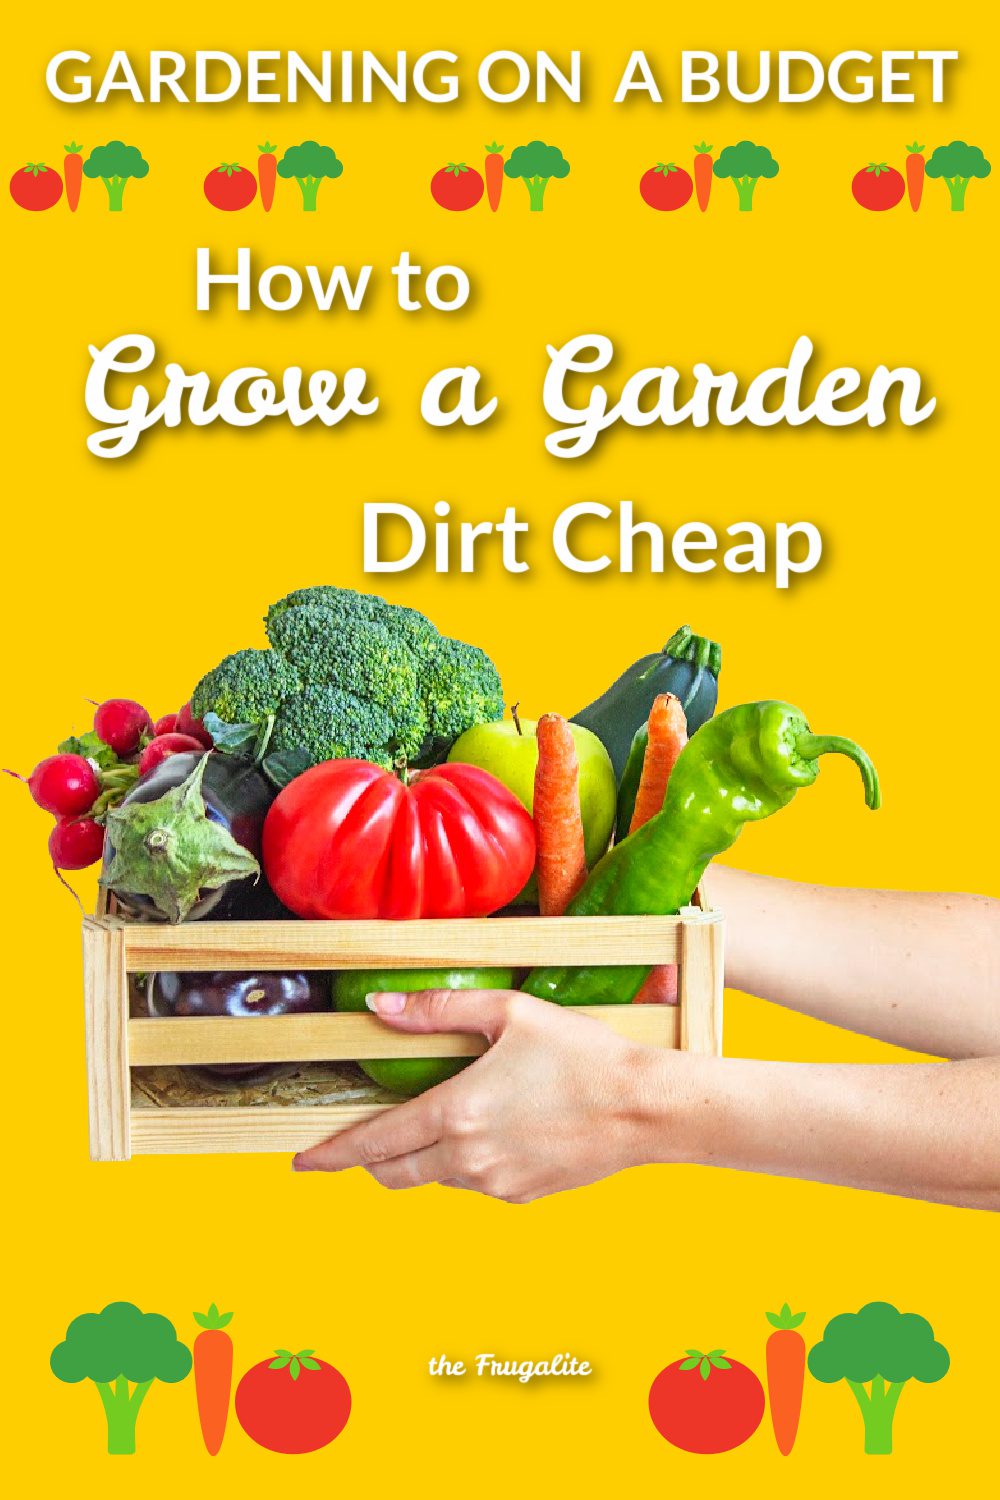 Gardening on a Budget: How to Grow Food Dirt Cheap